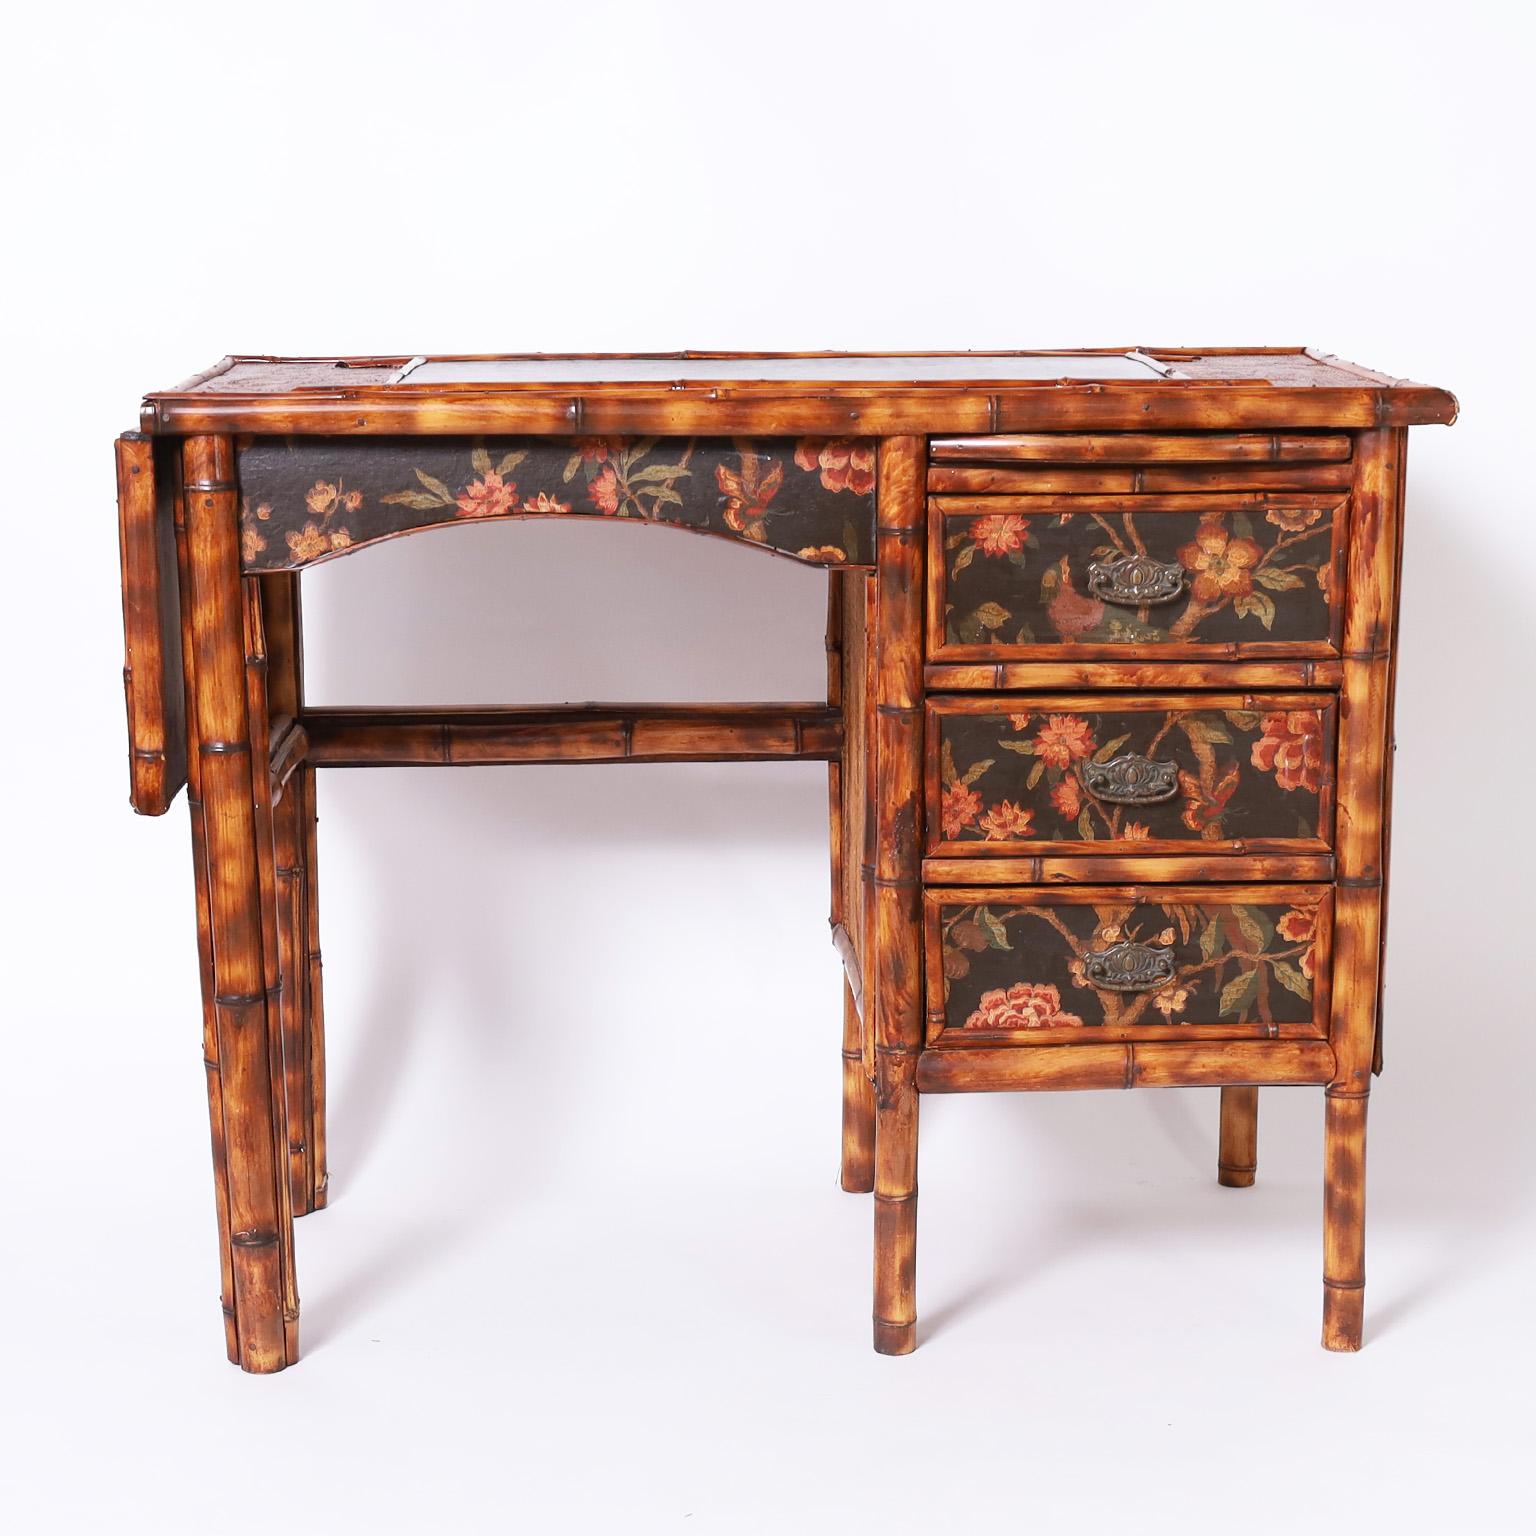 Charming 19th century three drawer desk featuring leather panels on top, foldout writing shelf, grasscloth panels on the top and side and floral decoupaged drawer fronts and pull out tray as only the English can do. 

Extended width: 47